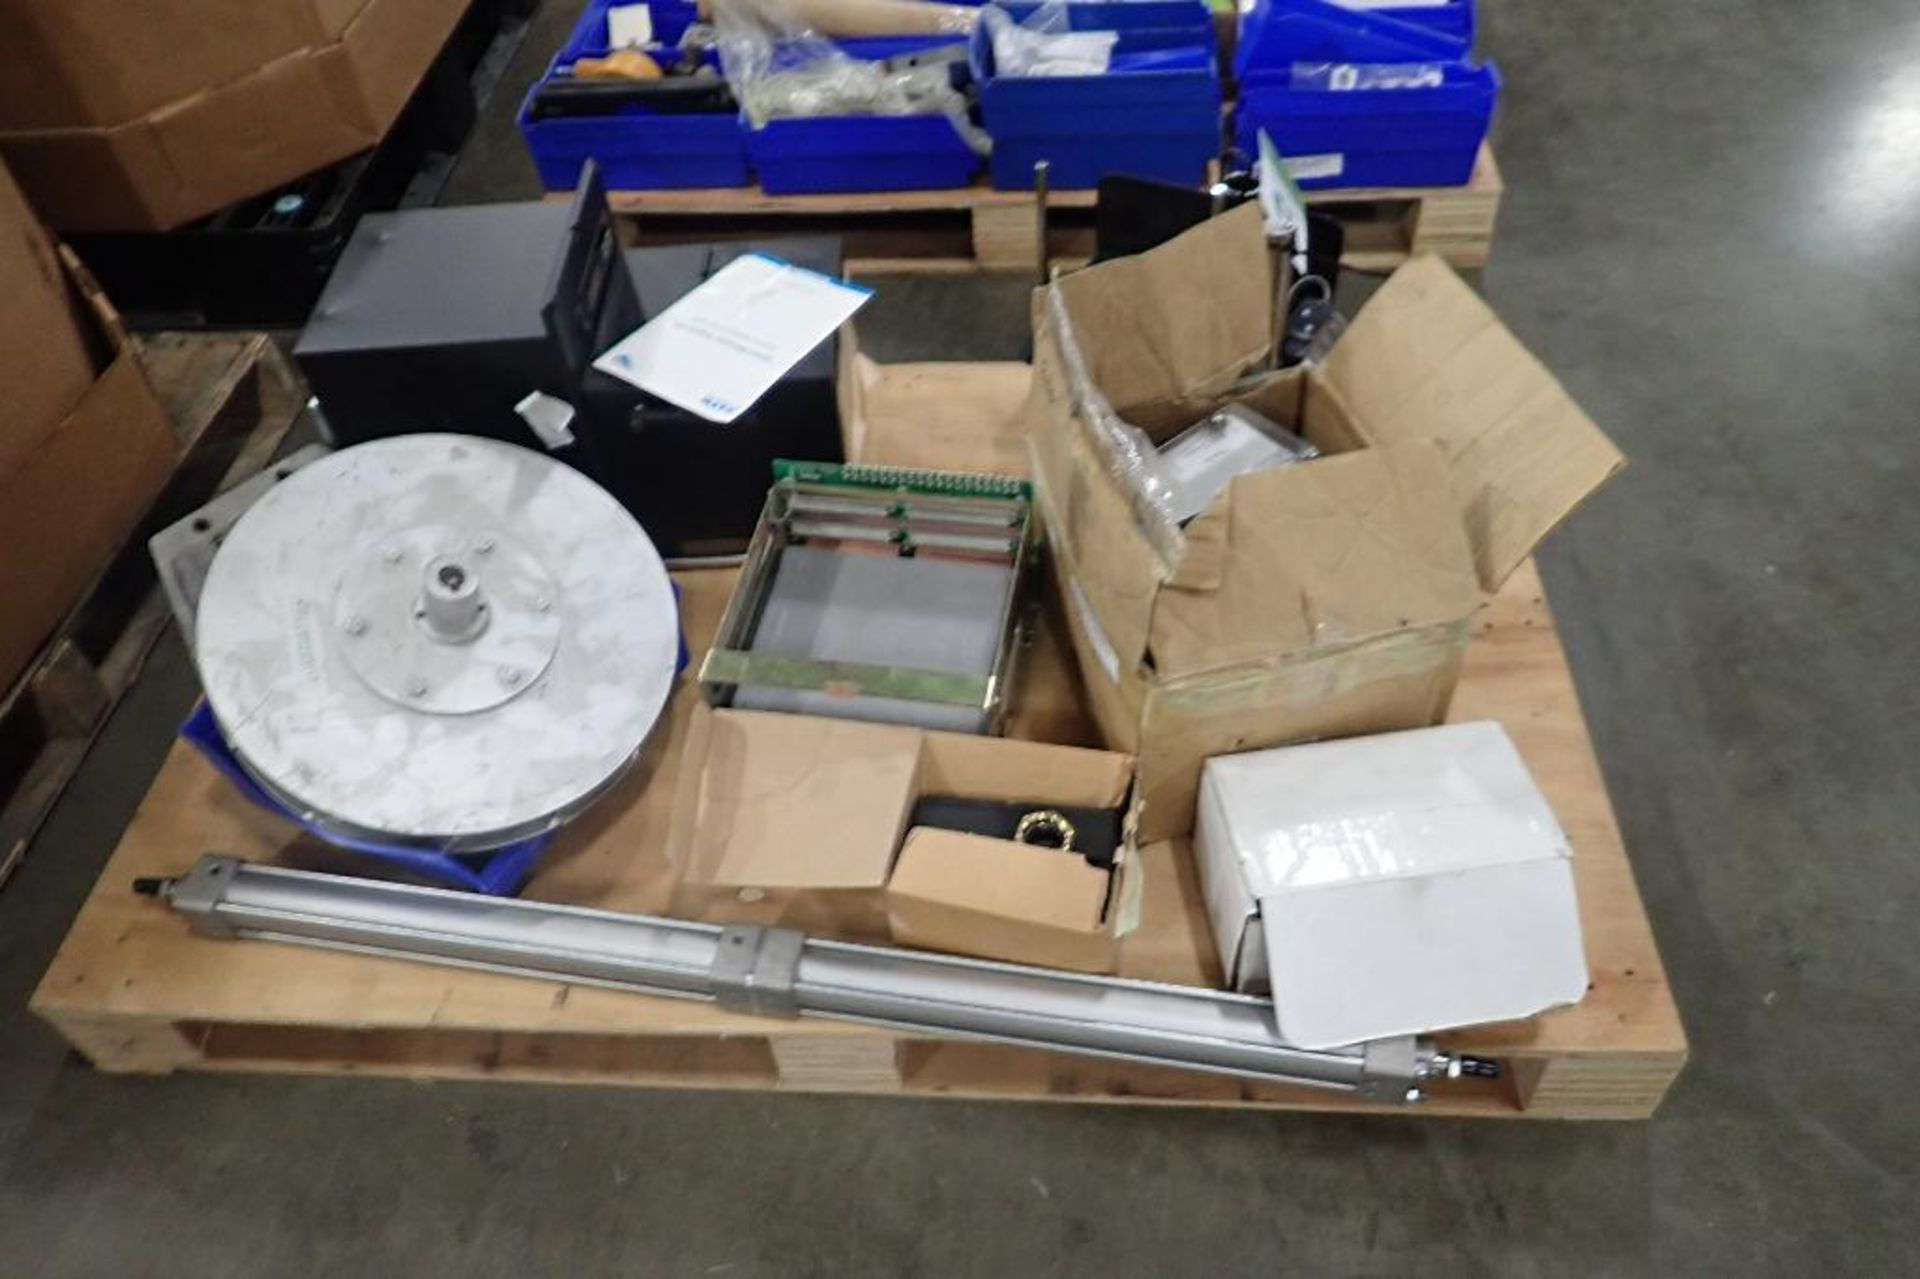 (2) Skids of parts, conveyor chain, belting, Sato printer, labeler parts, printer parts. (See photos - Image 8 of 20